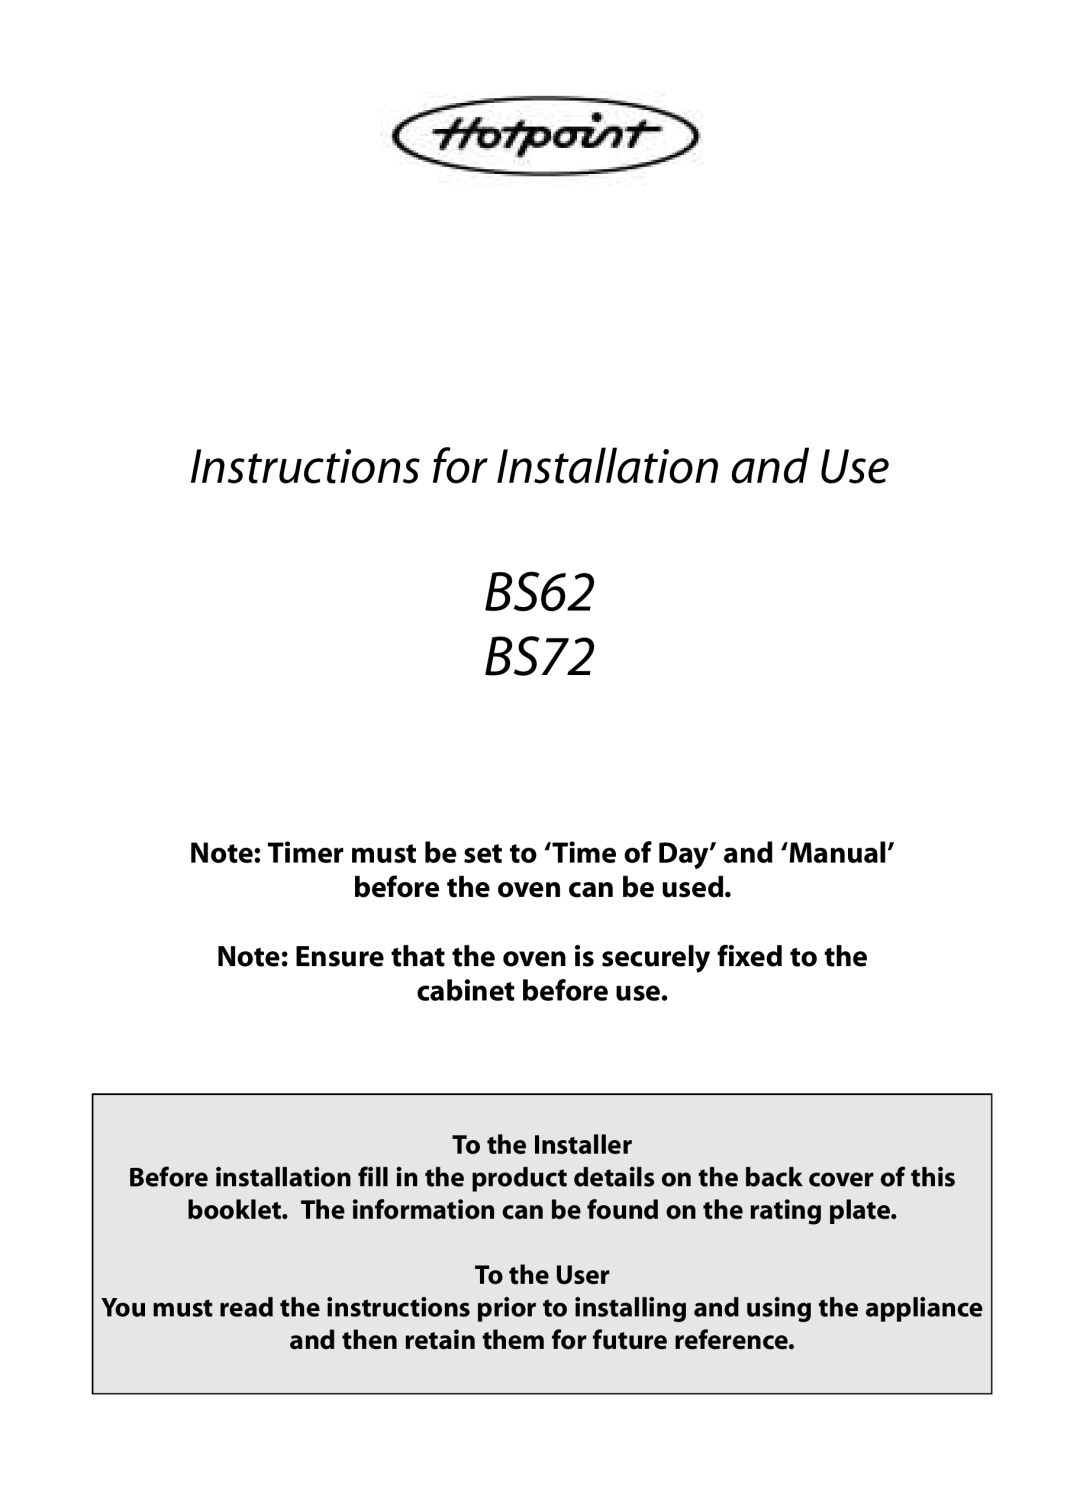 Hotpoint manual BS62 BS72, Instructions for Installation and Use, Note Timer must be set to ‘Time of Day’ and ‘Manual’ 